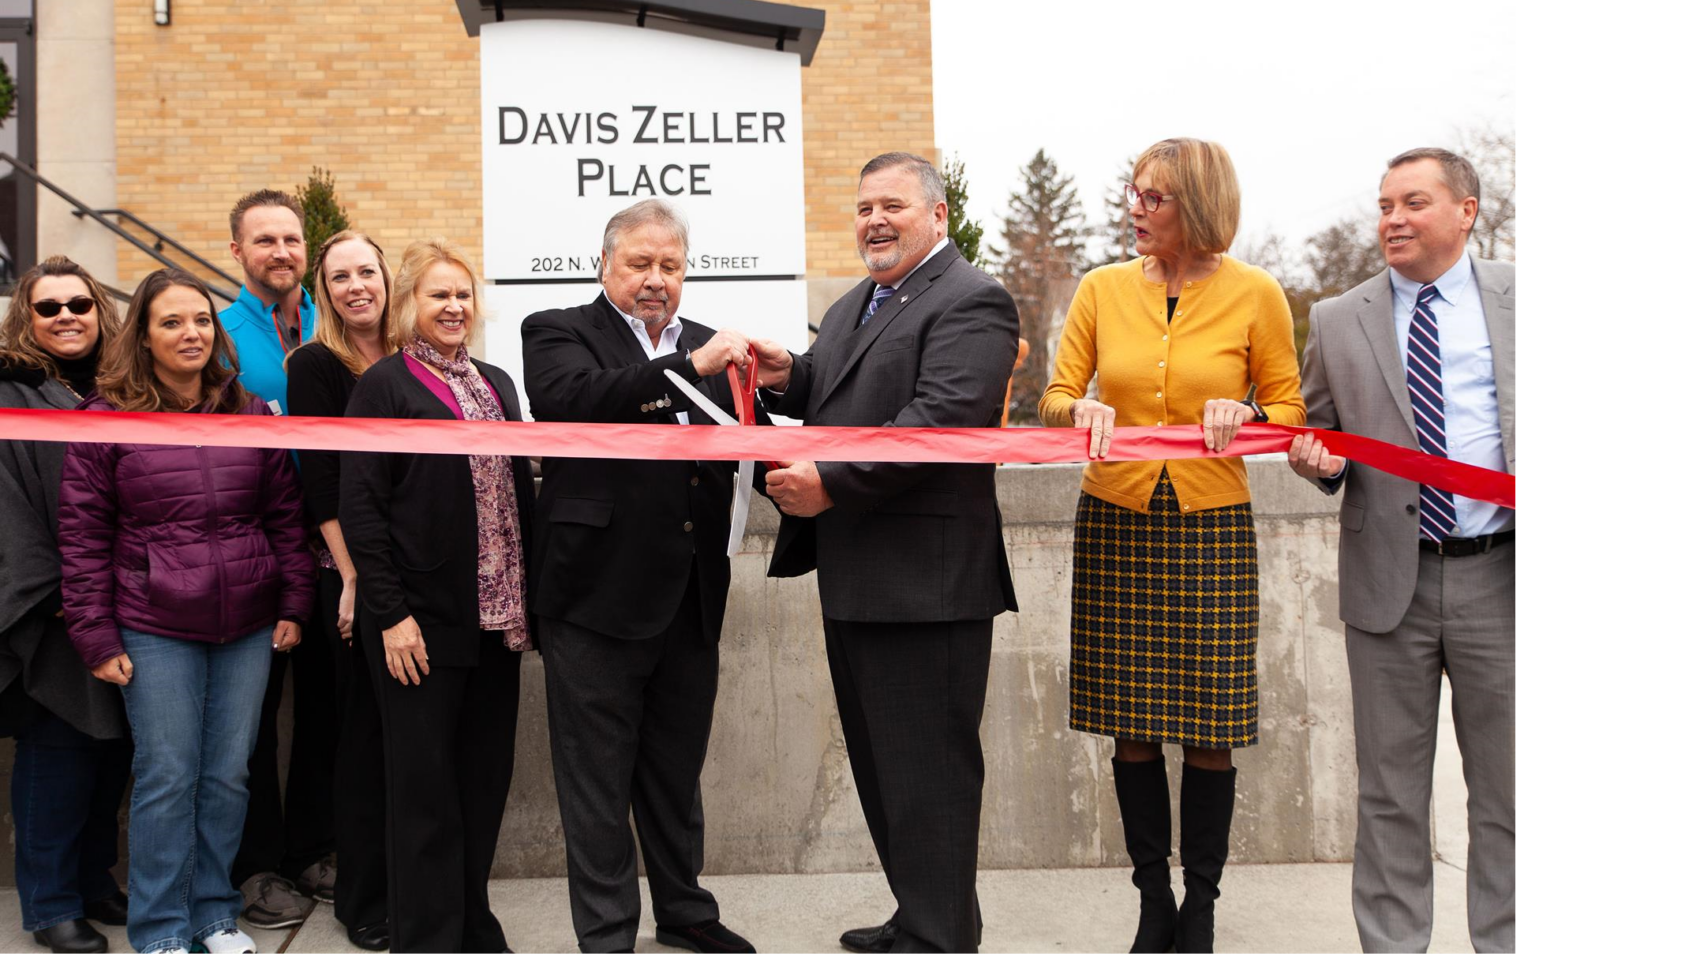 Group cutting ribbon for opening of Davis Zeller Place